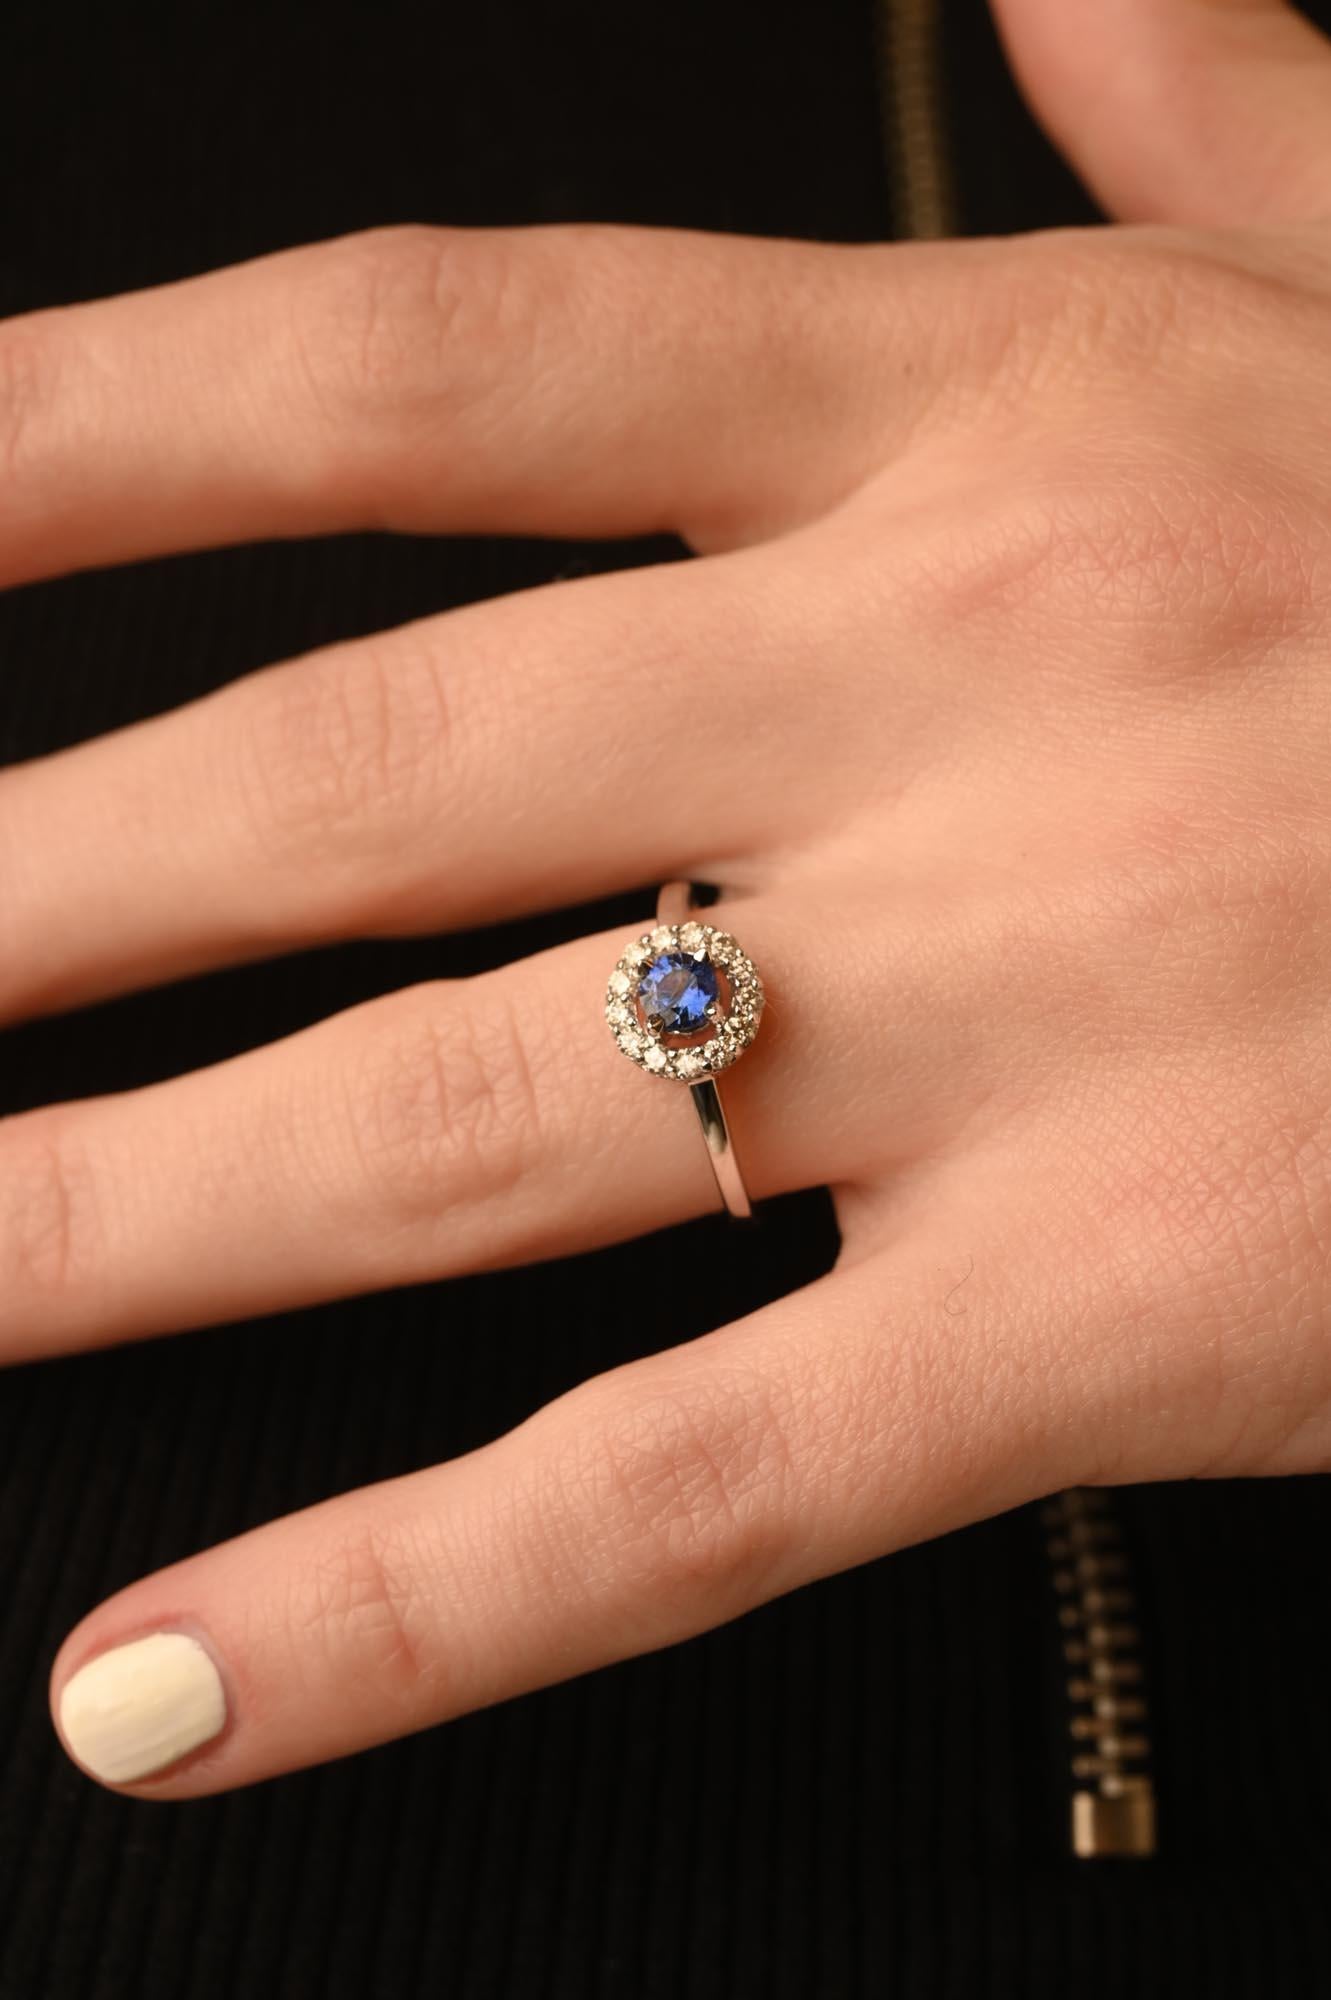 For Sale:  14K Solid White Gold Classic Round Blue Sapphire Ring with Halo Diamonds 7